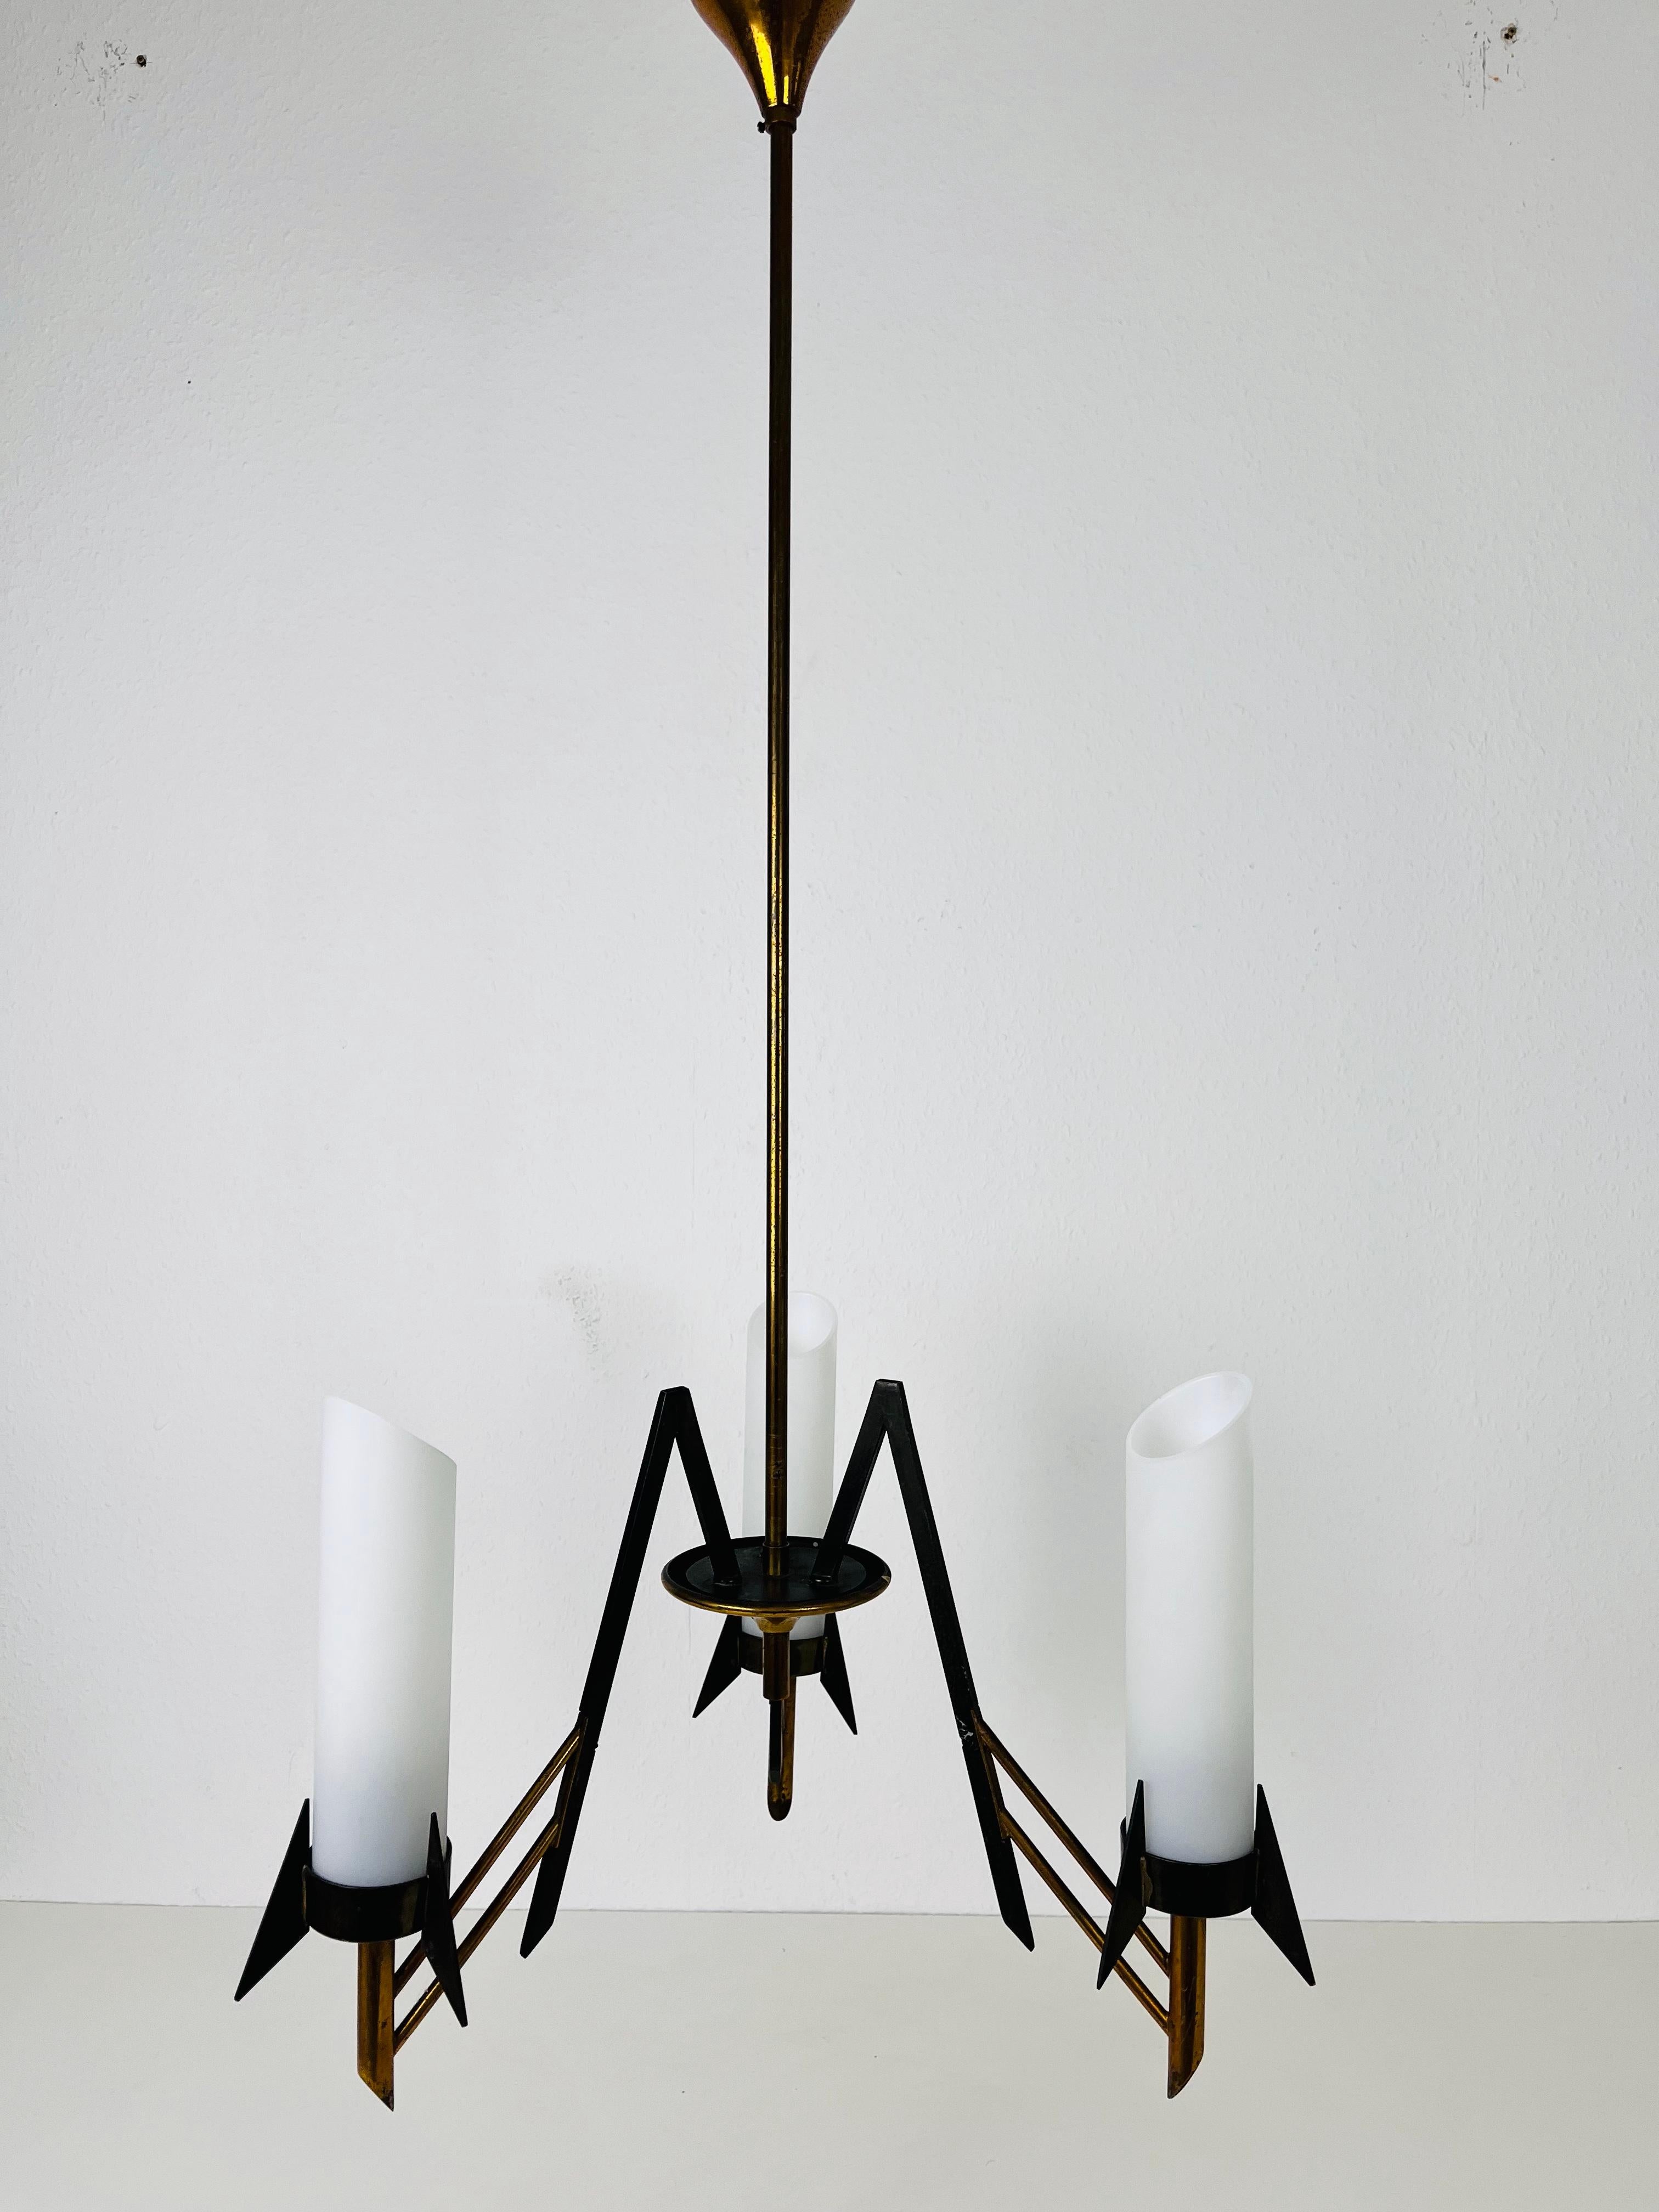 An italian chandelier made in Italy in the 1960s. It is fascinating with its three arms, each of it with an opaline glass element. 

The light requires 3 E14 light bulbs. Works with both 120/220V. Good vintage condition.

Free worldwide express